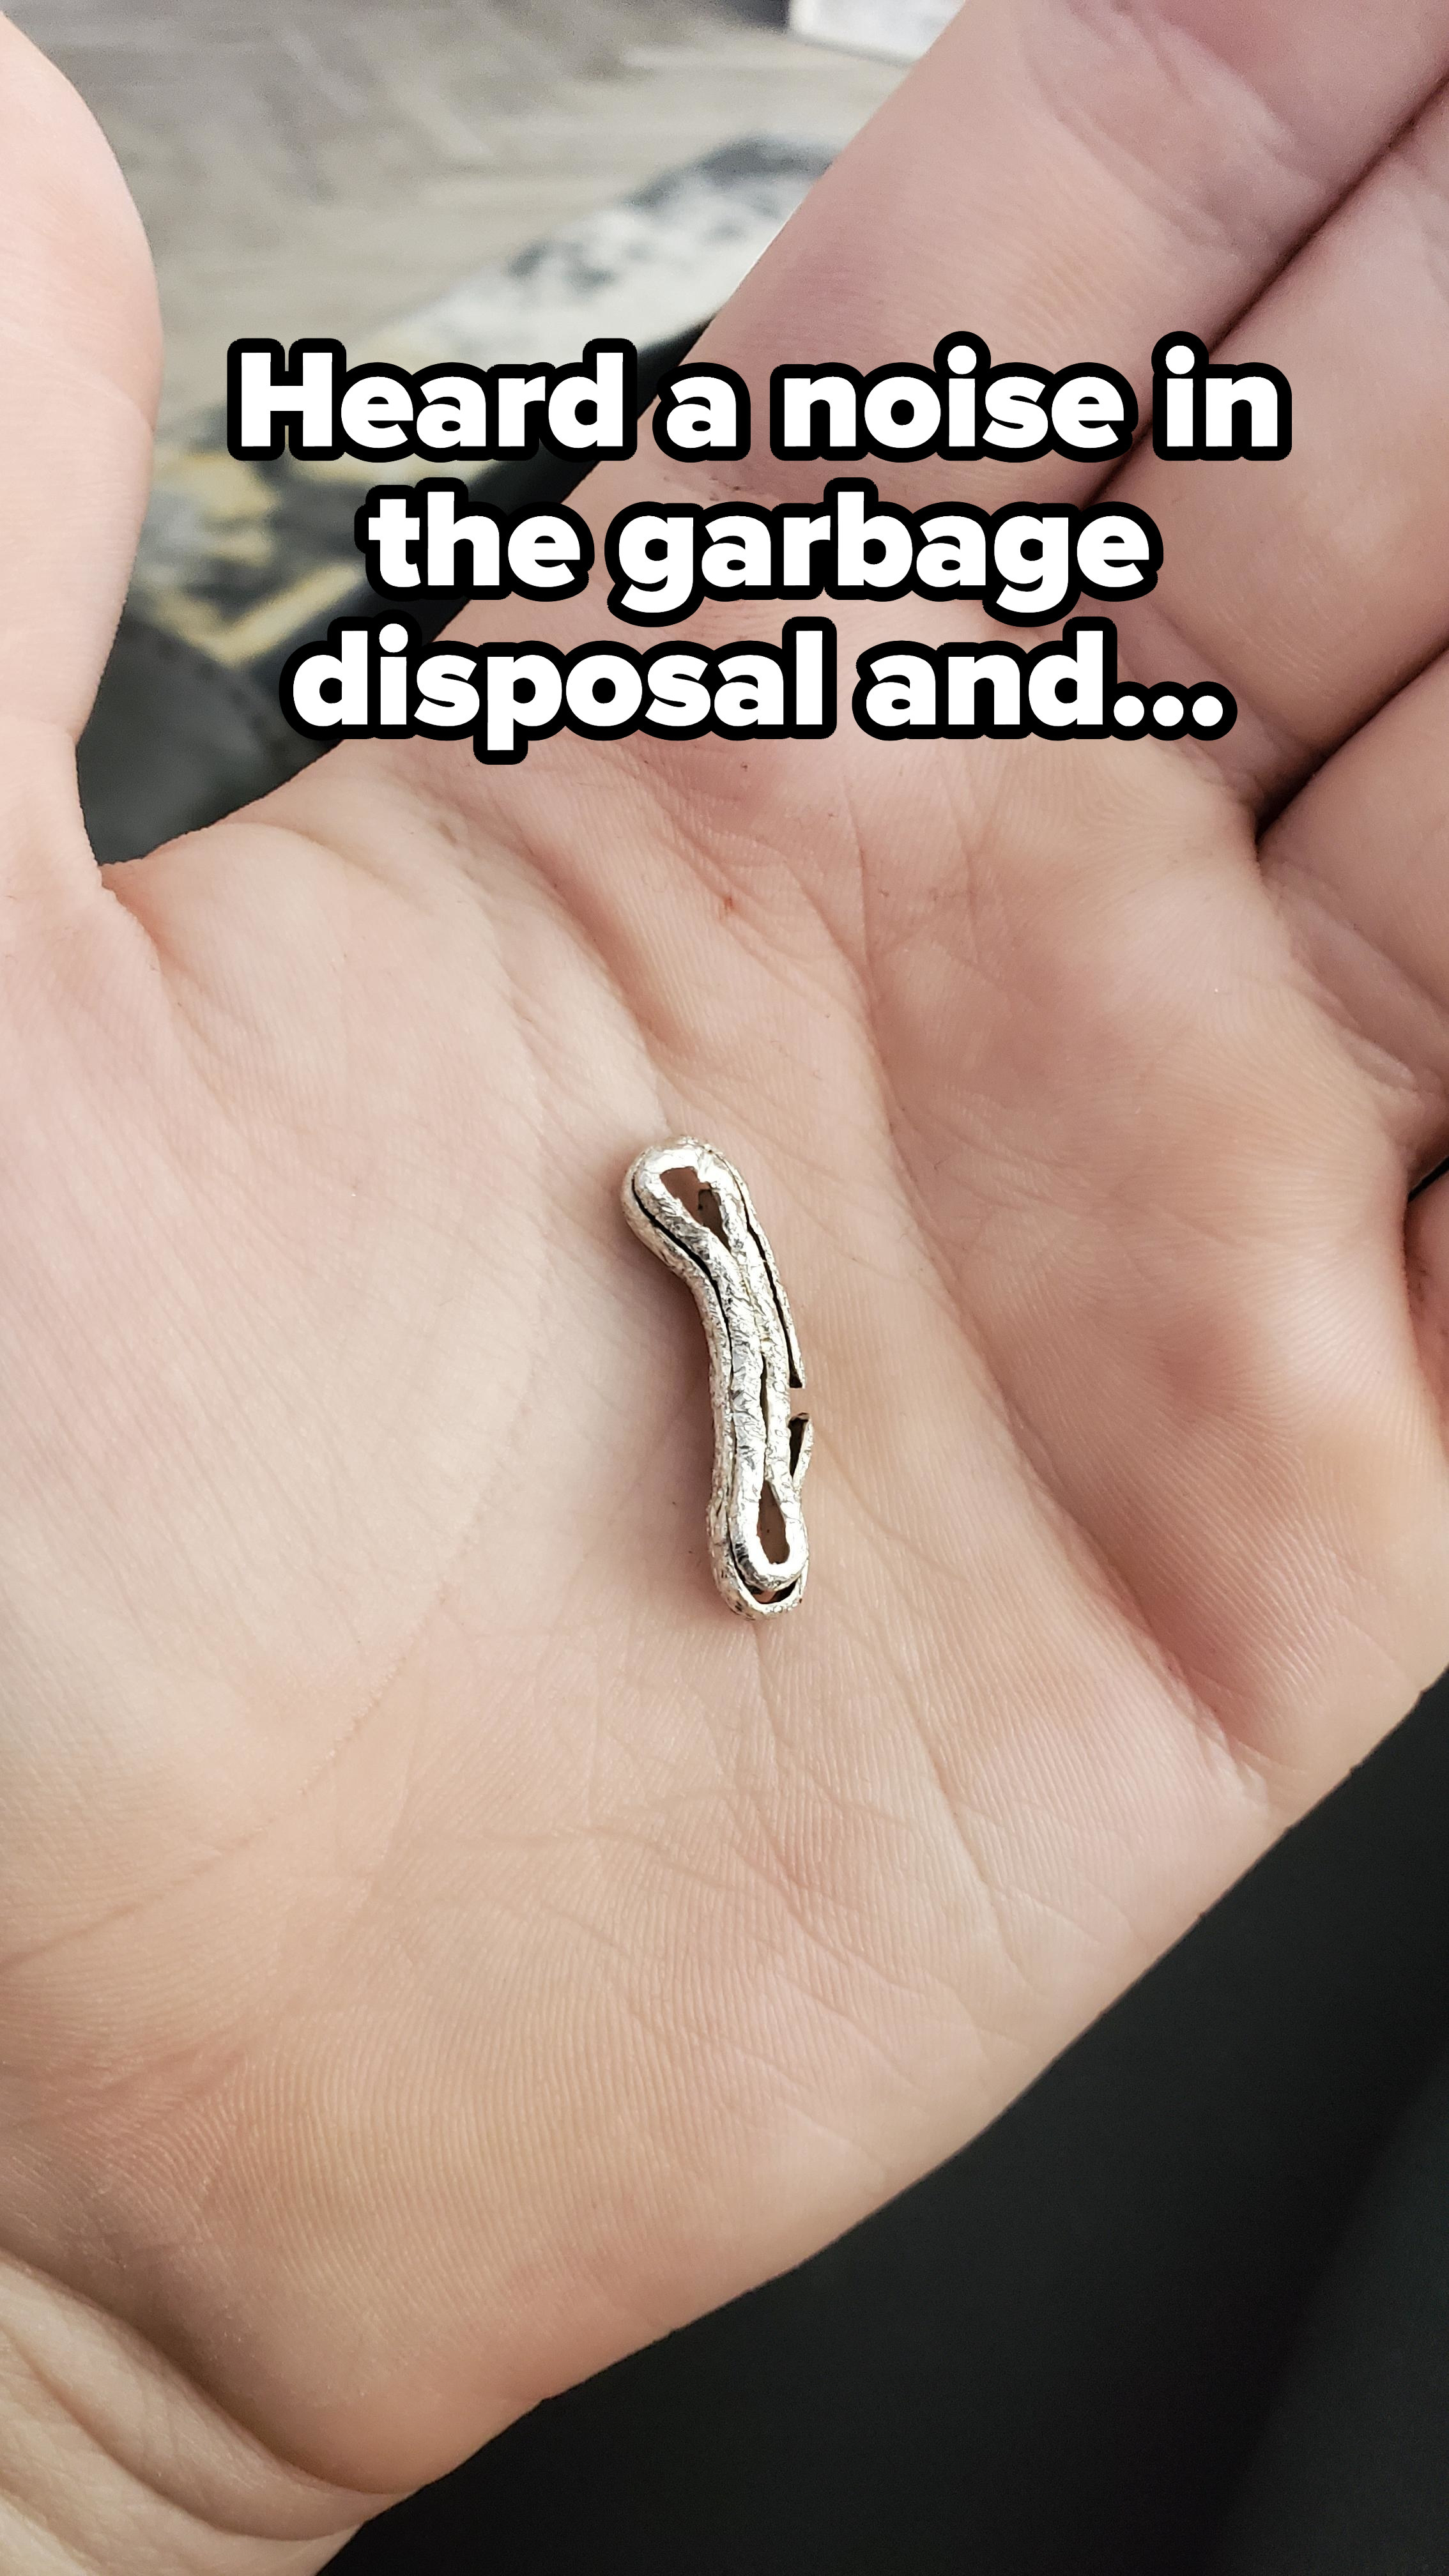 Flattened ring that fell in a garbage disposal